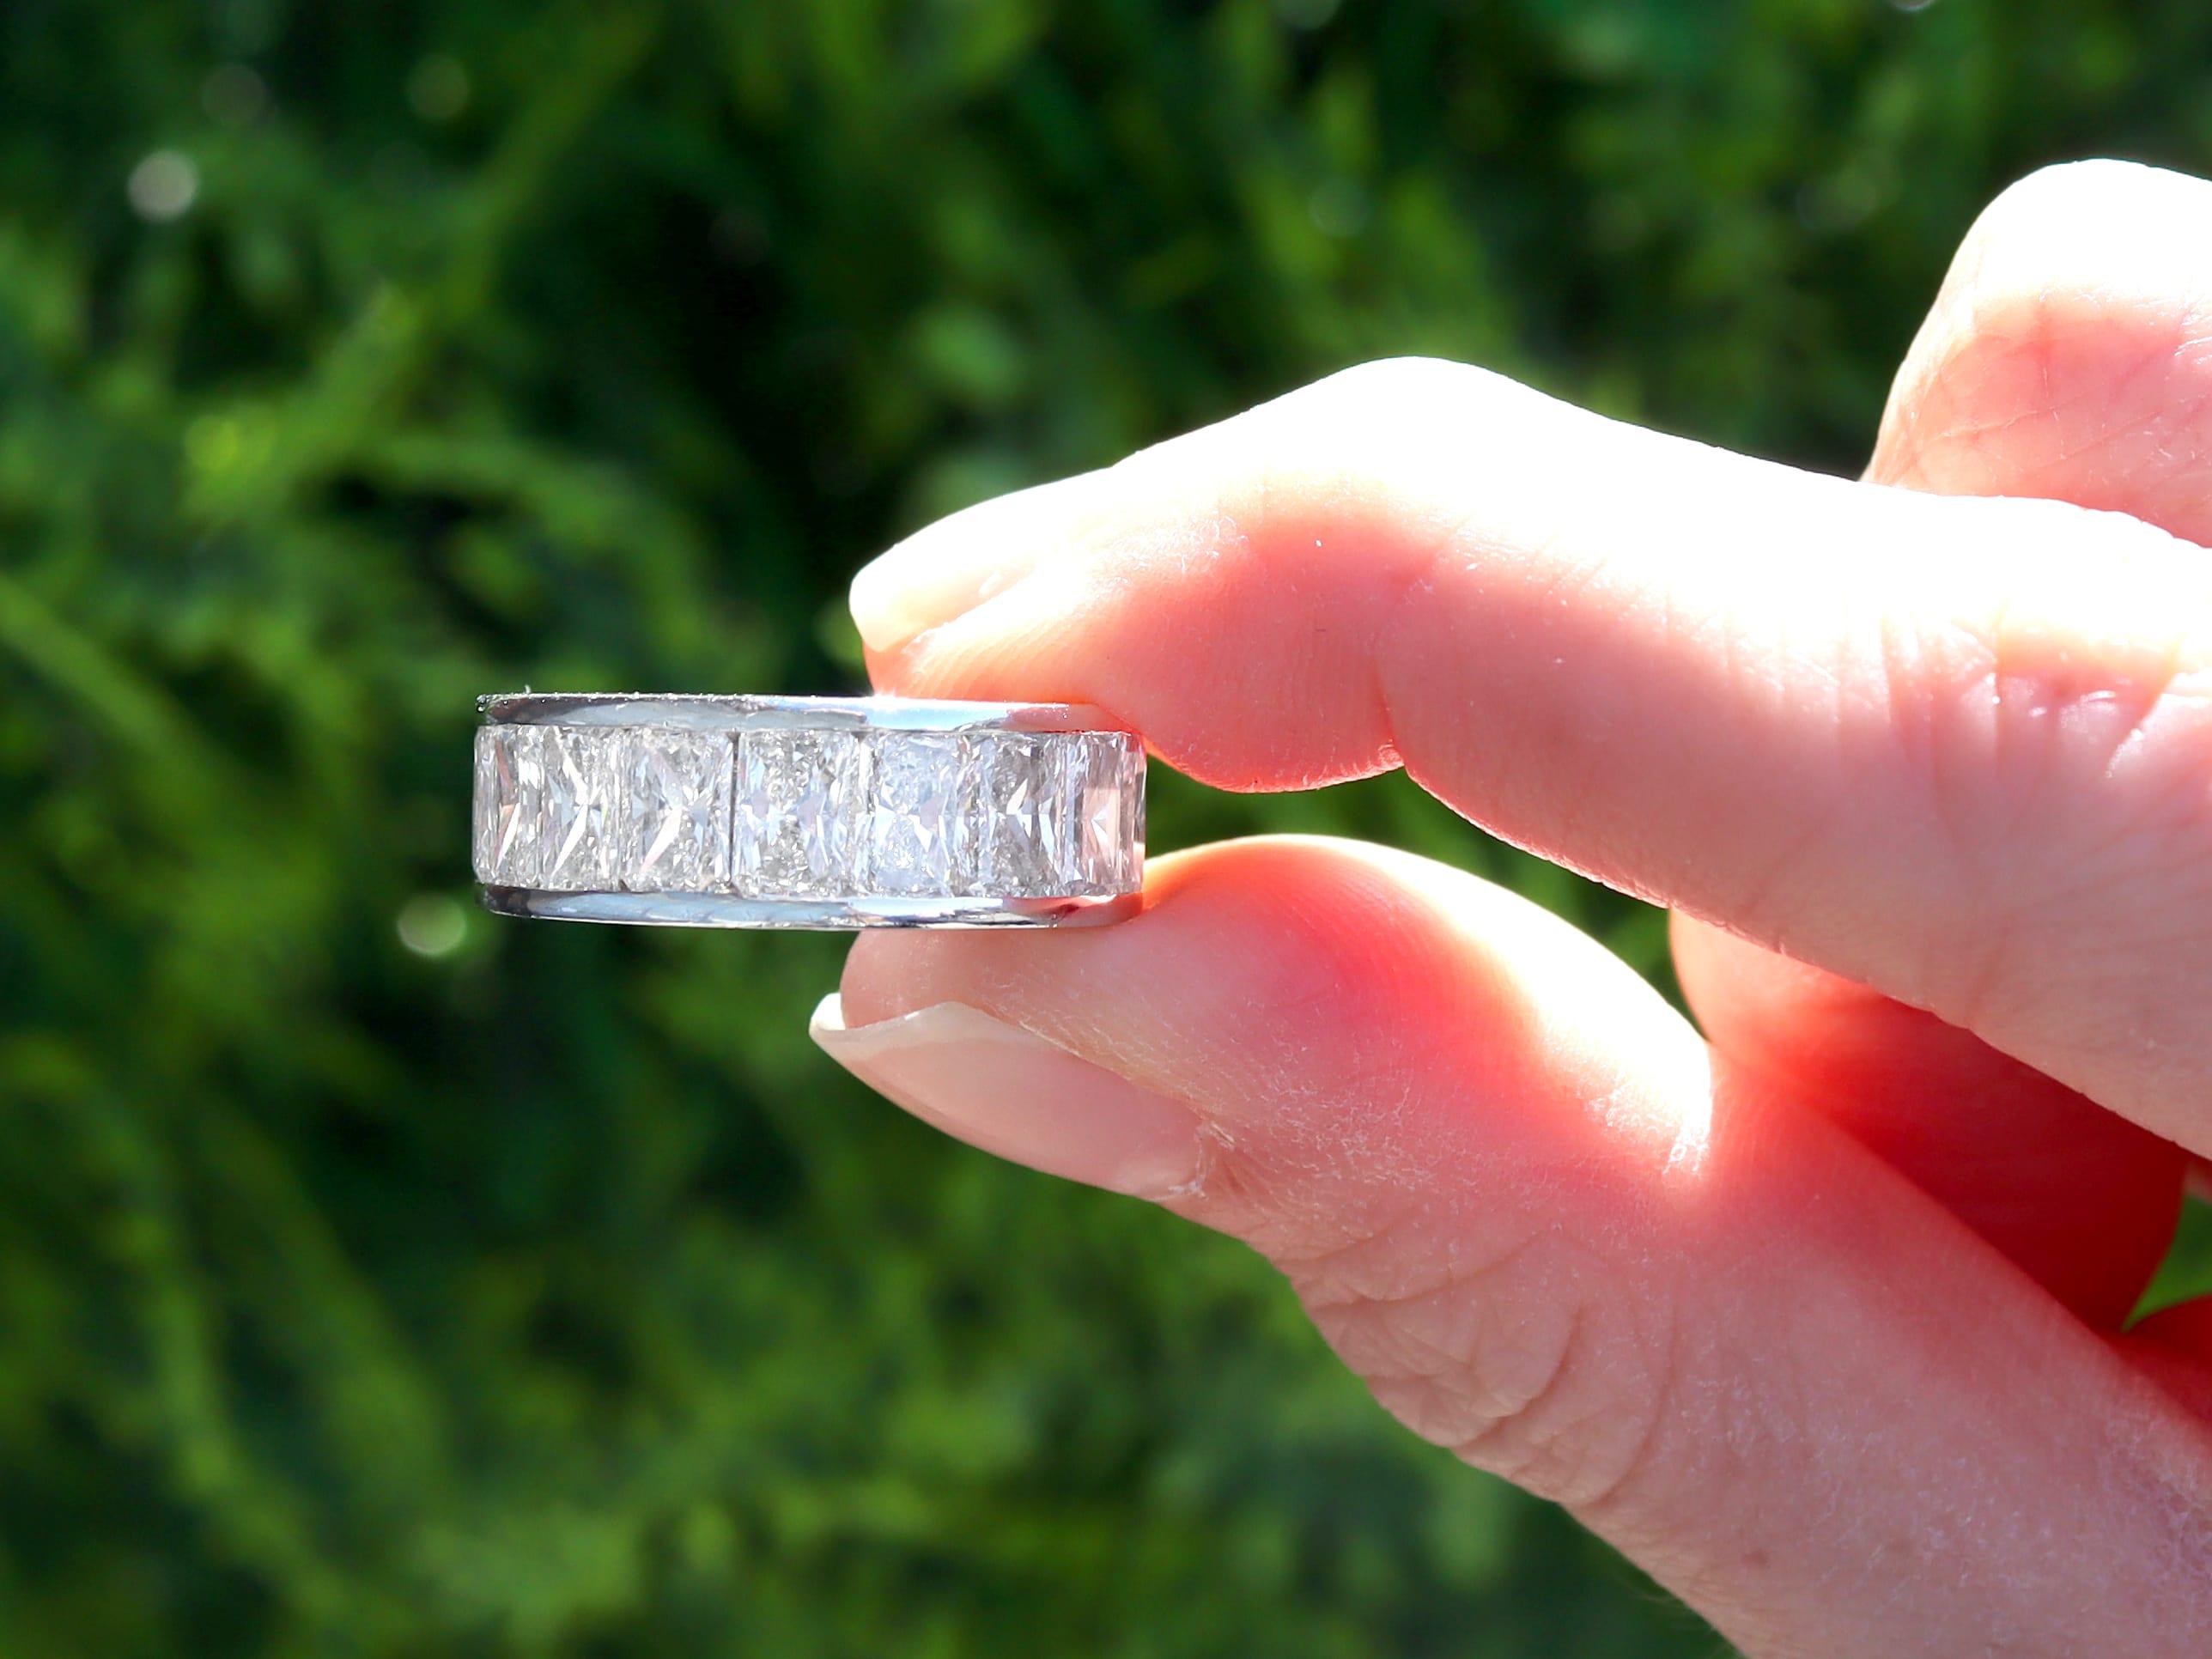 A magnificent, stunning, fine and impressive vintage 1980's 9.54 carat diamond and platinum full eternity ring; part of our diverse diamond jewellery collections

This magnificent, fine and impressive vintage diamond eternity ring has been crafted